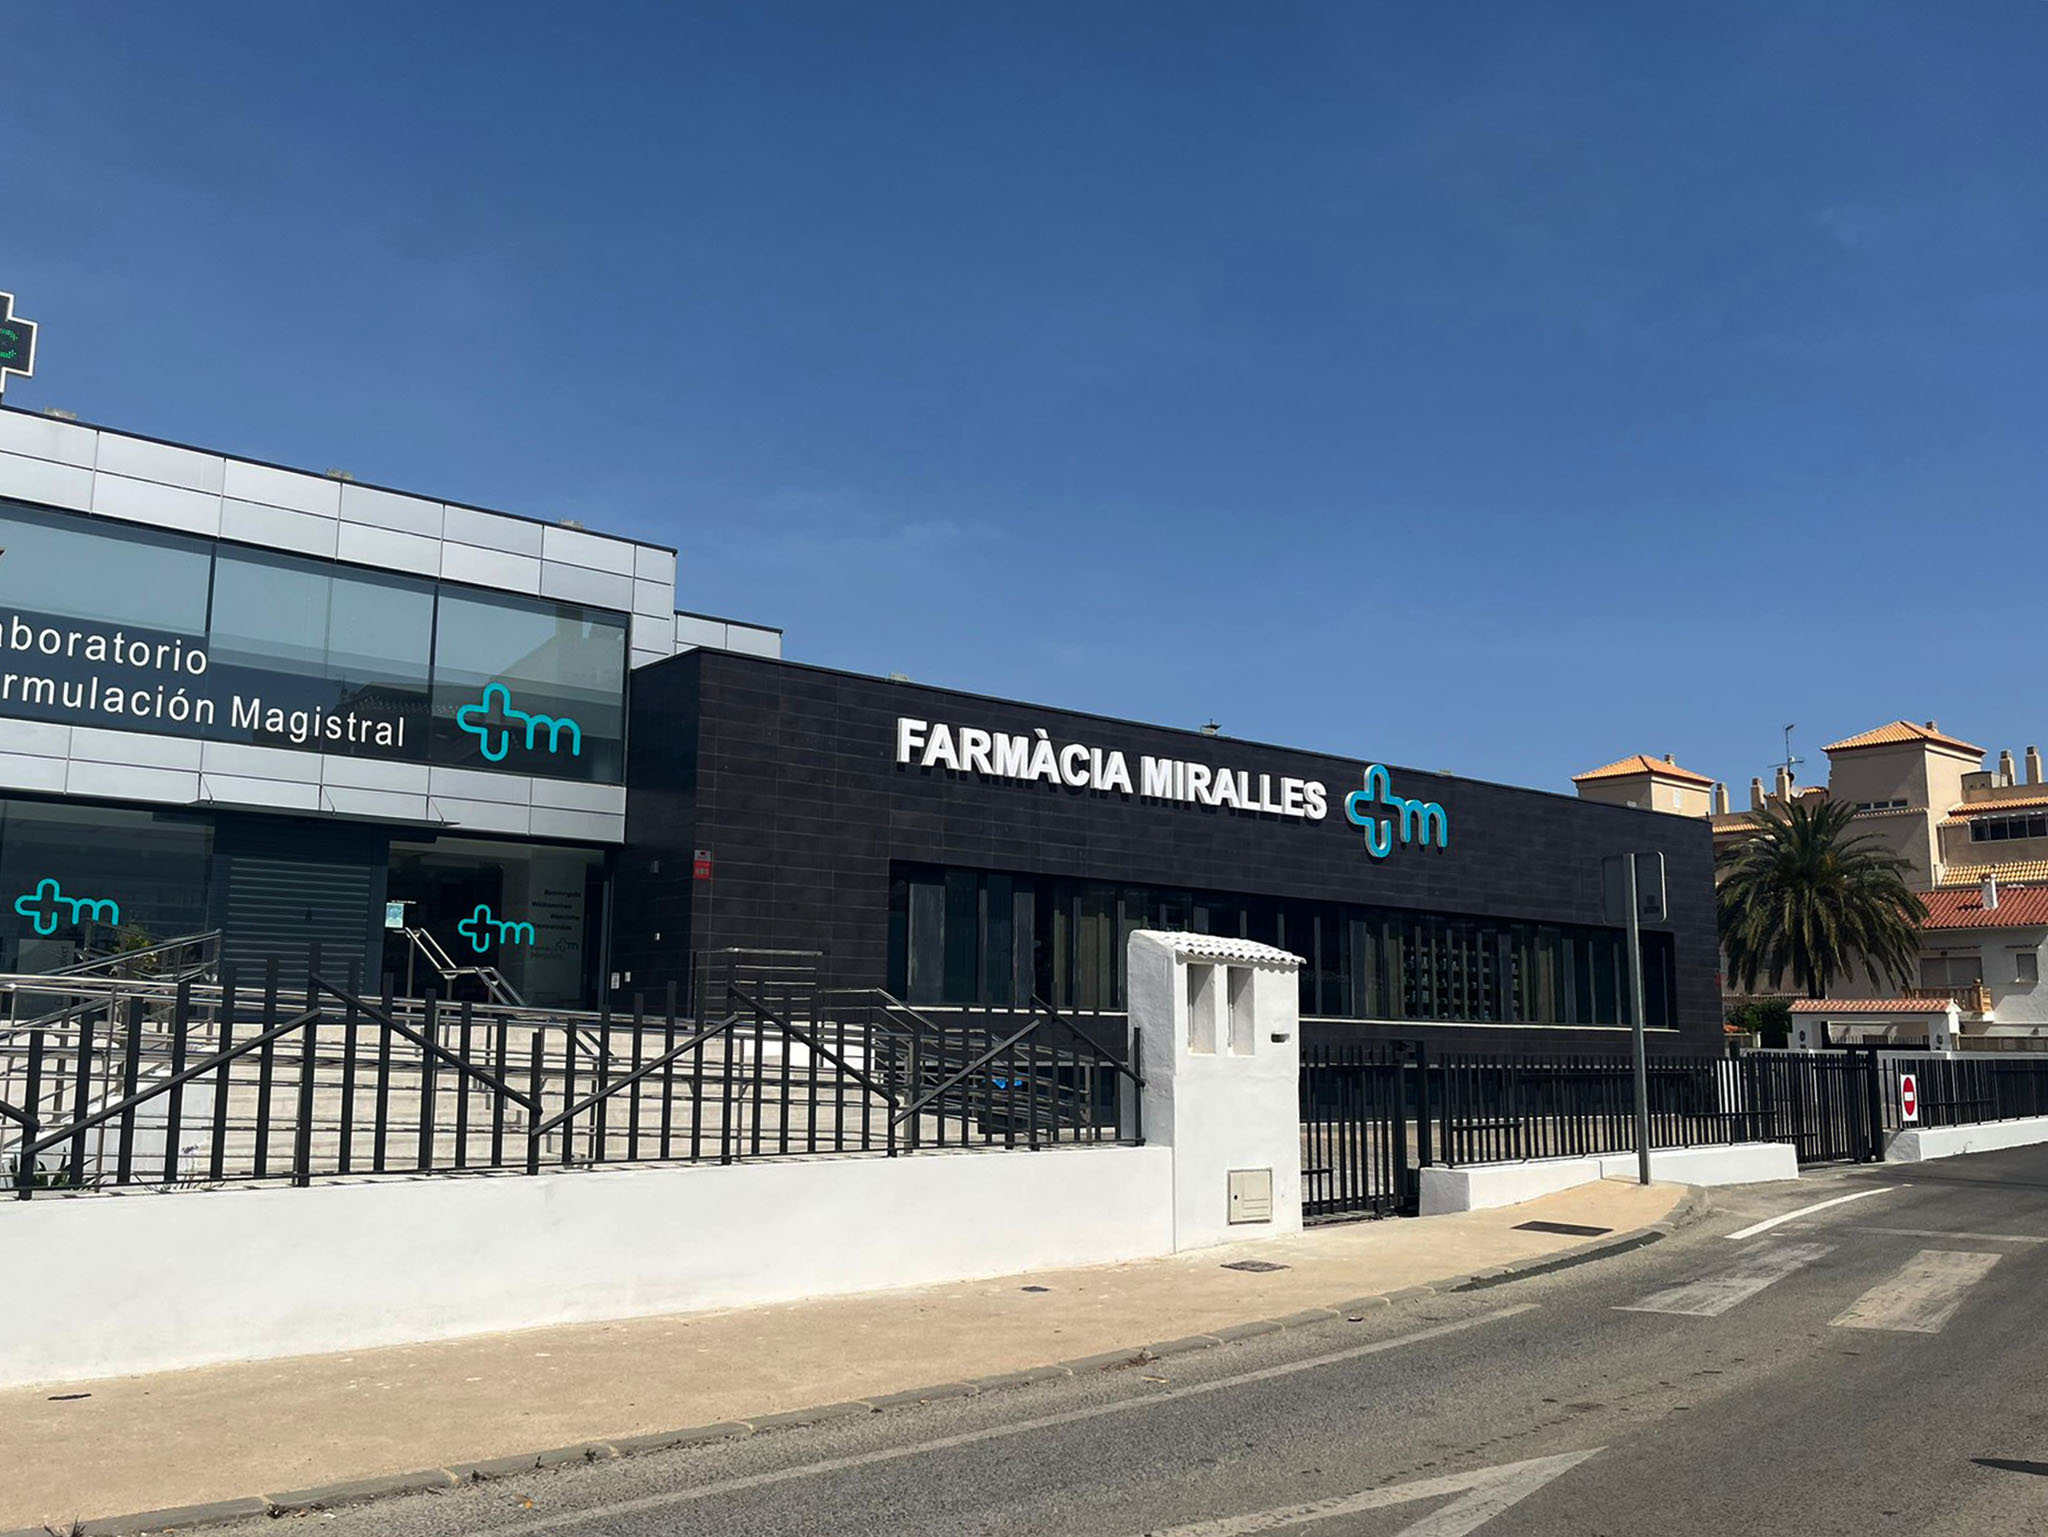 Fernando Miralles Mas Pharmacy: hours, location and contact